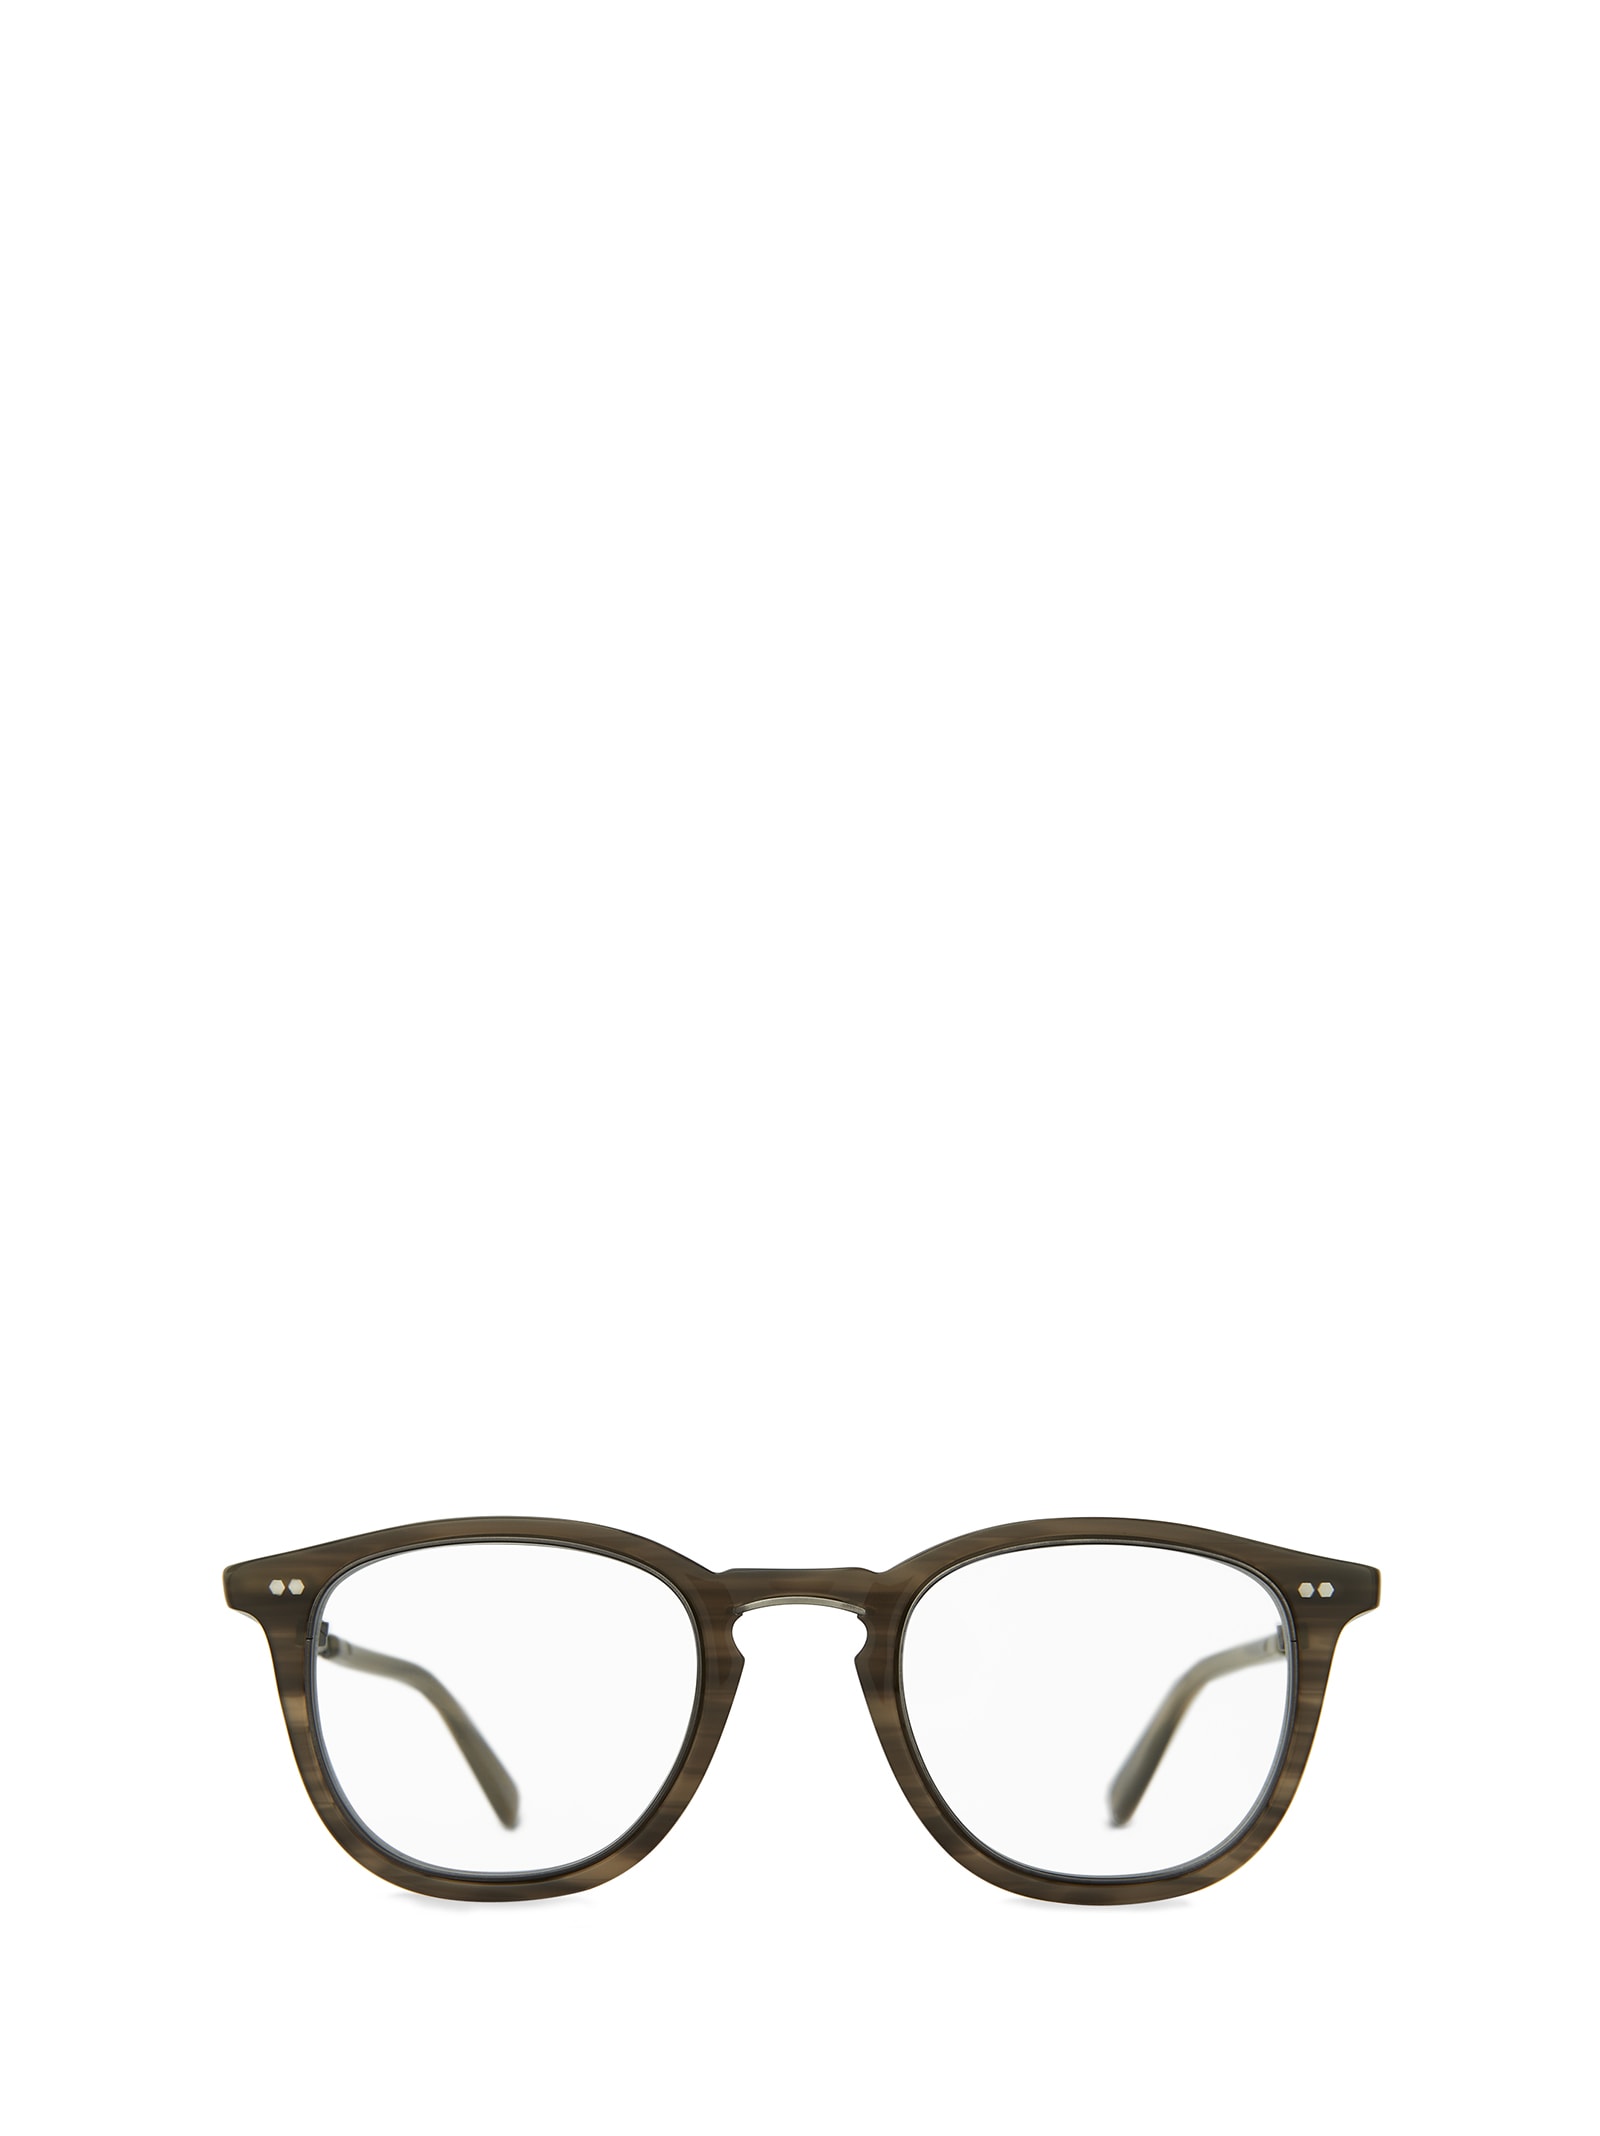 MR LEIGHT COOPERS C GREYWOOD - PEWTER GLASSES